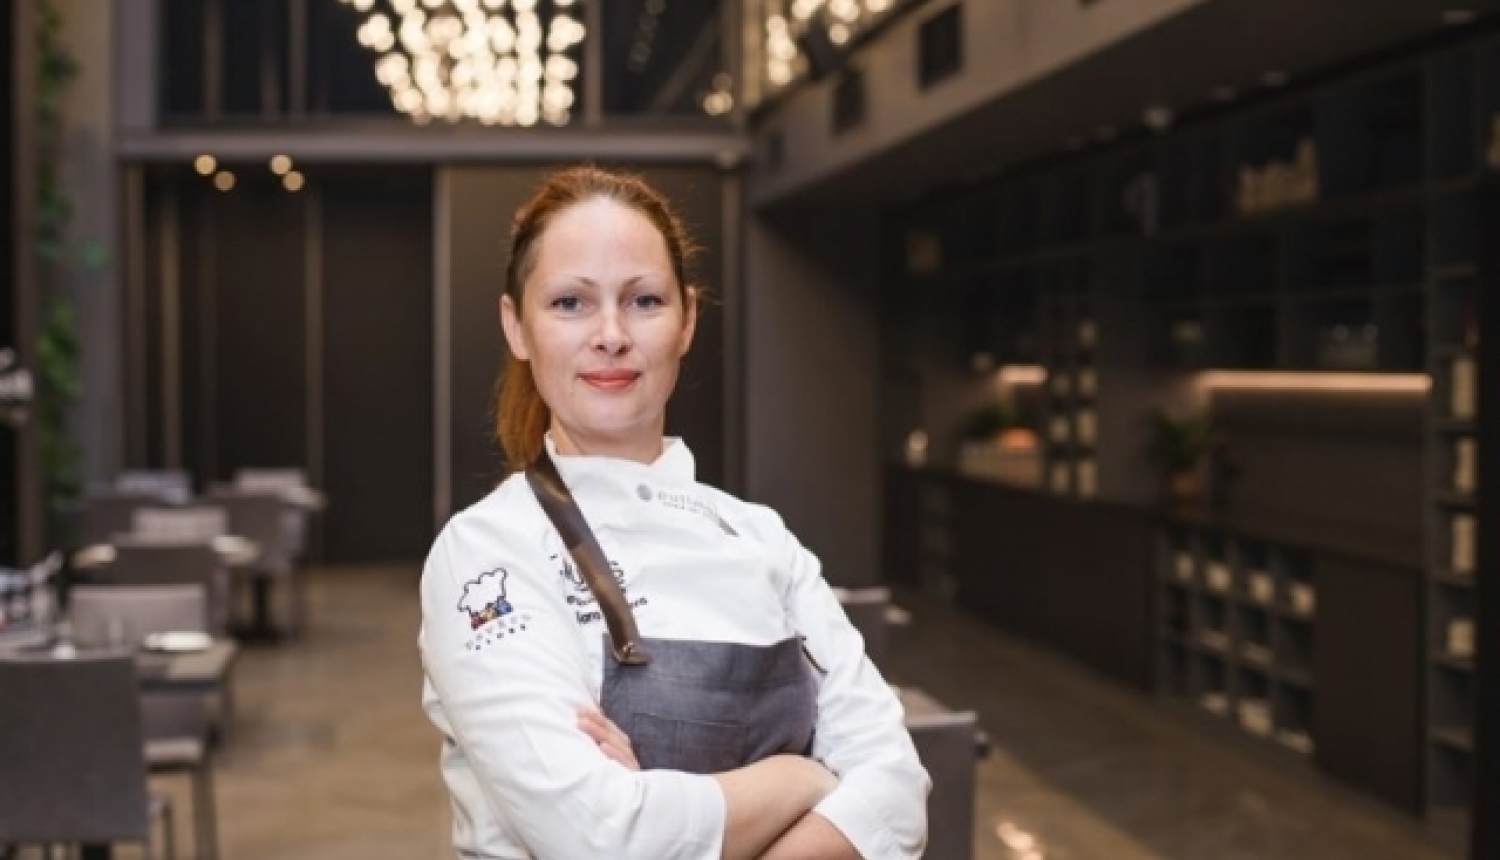 The Latvian gastronomy and hospitality industry is set on reaching new goals